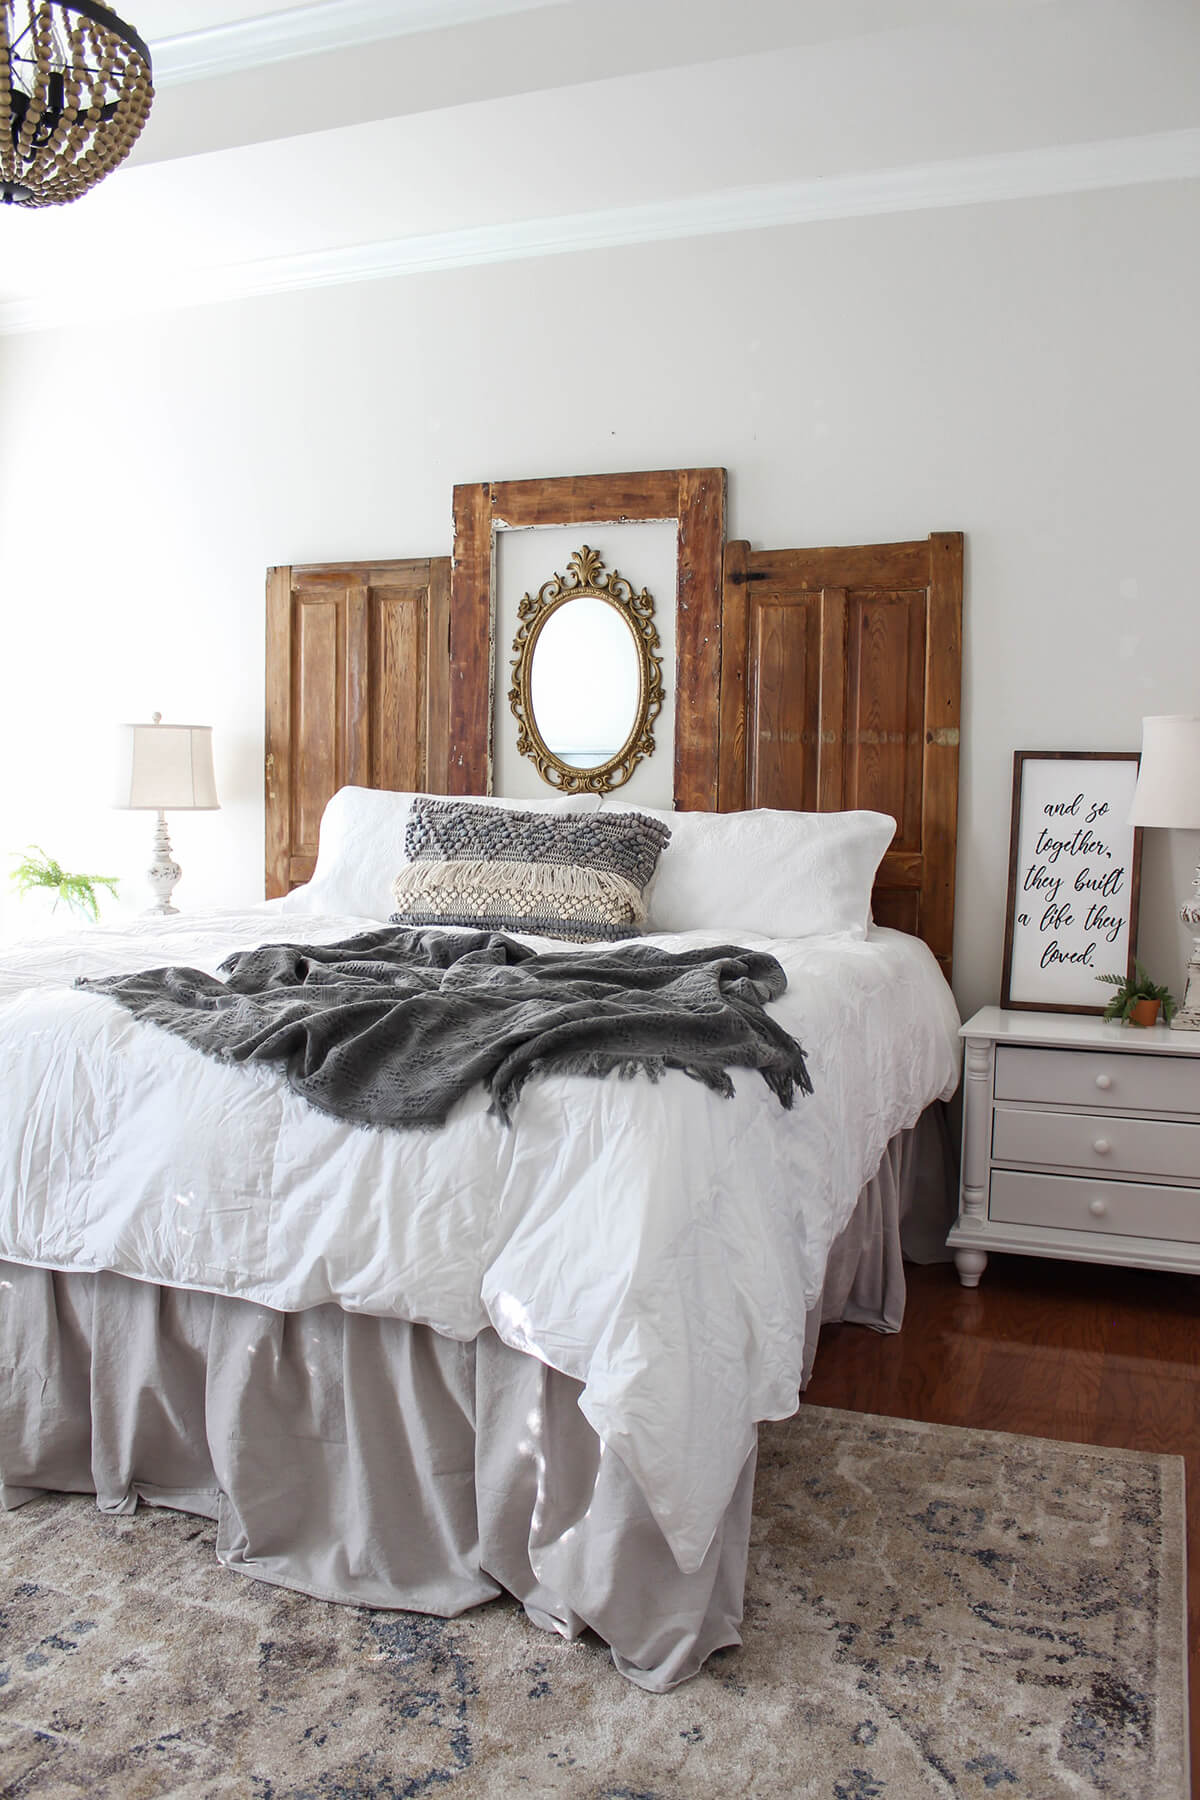 45 Best Repurposed Old Door Ideas And, How To Make A King Size Headboard From An Old Door Frame